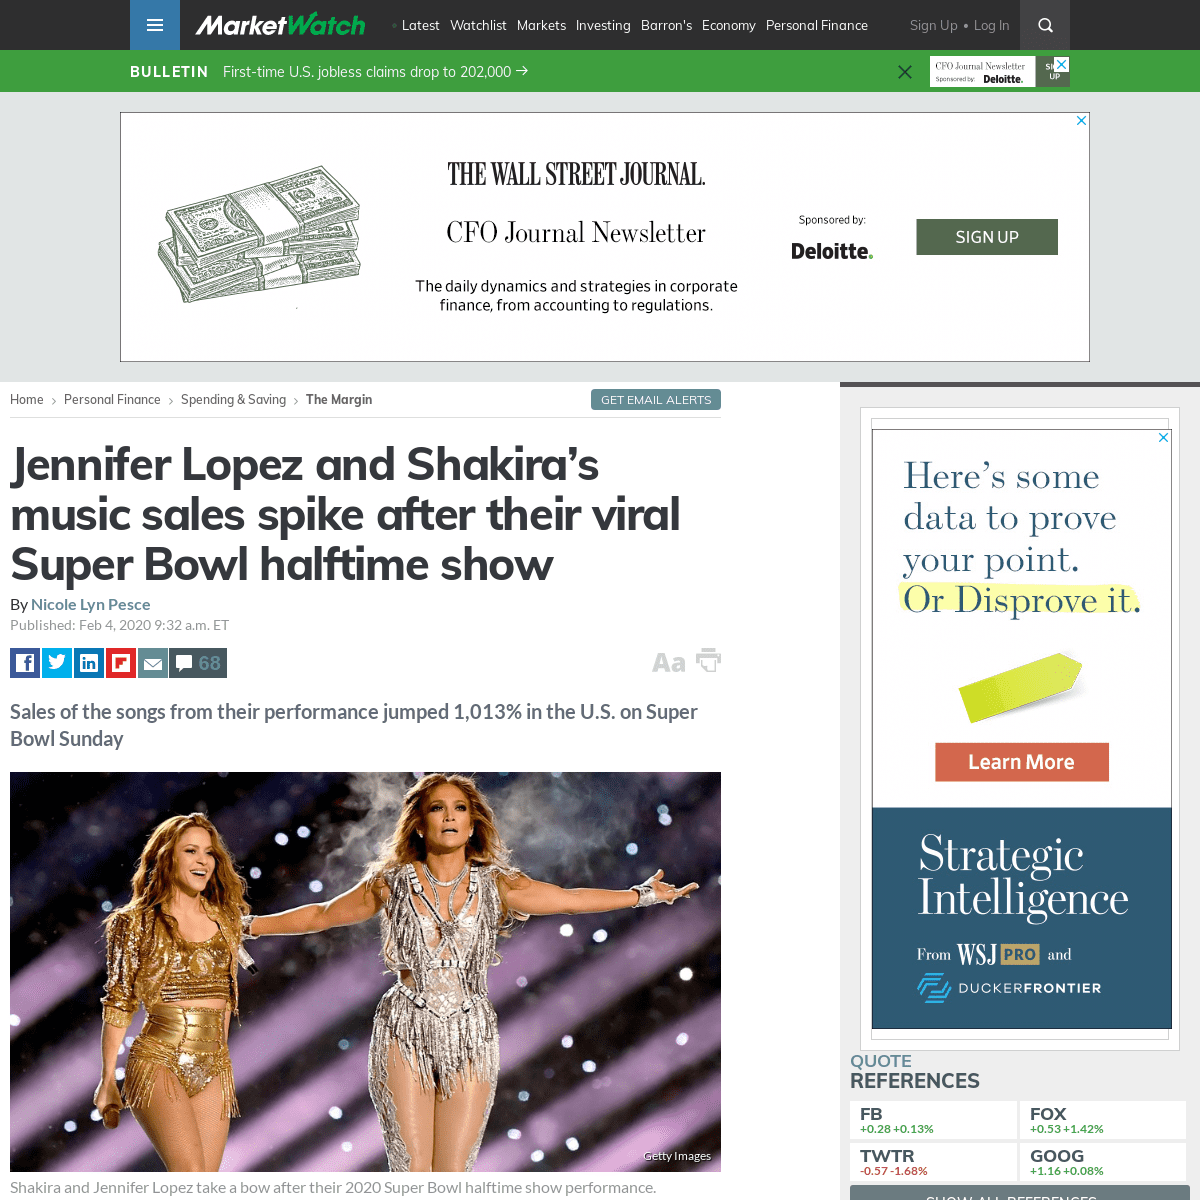 A complete backup of www.marketwatch.com/story/jennifer-lopez-and-shakiras-music-sales-spike-after-their-viral-super-bowl-halfti